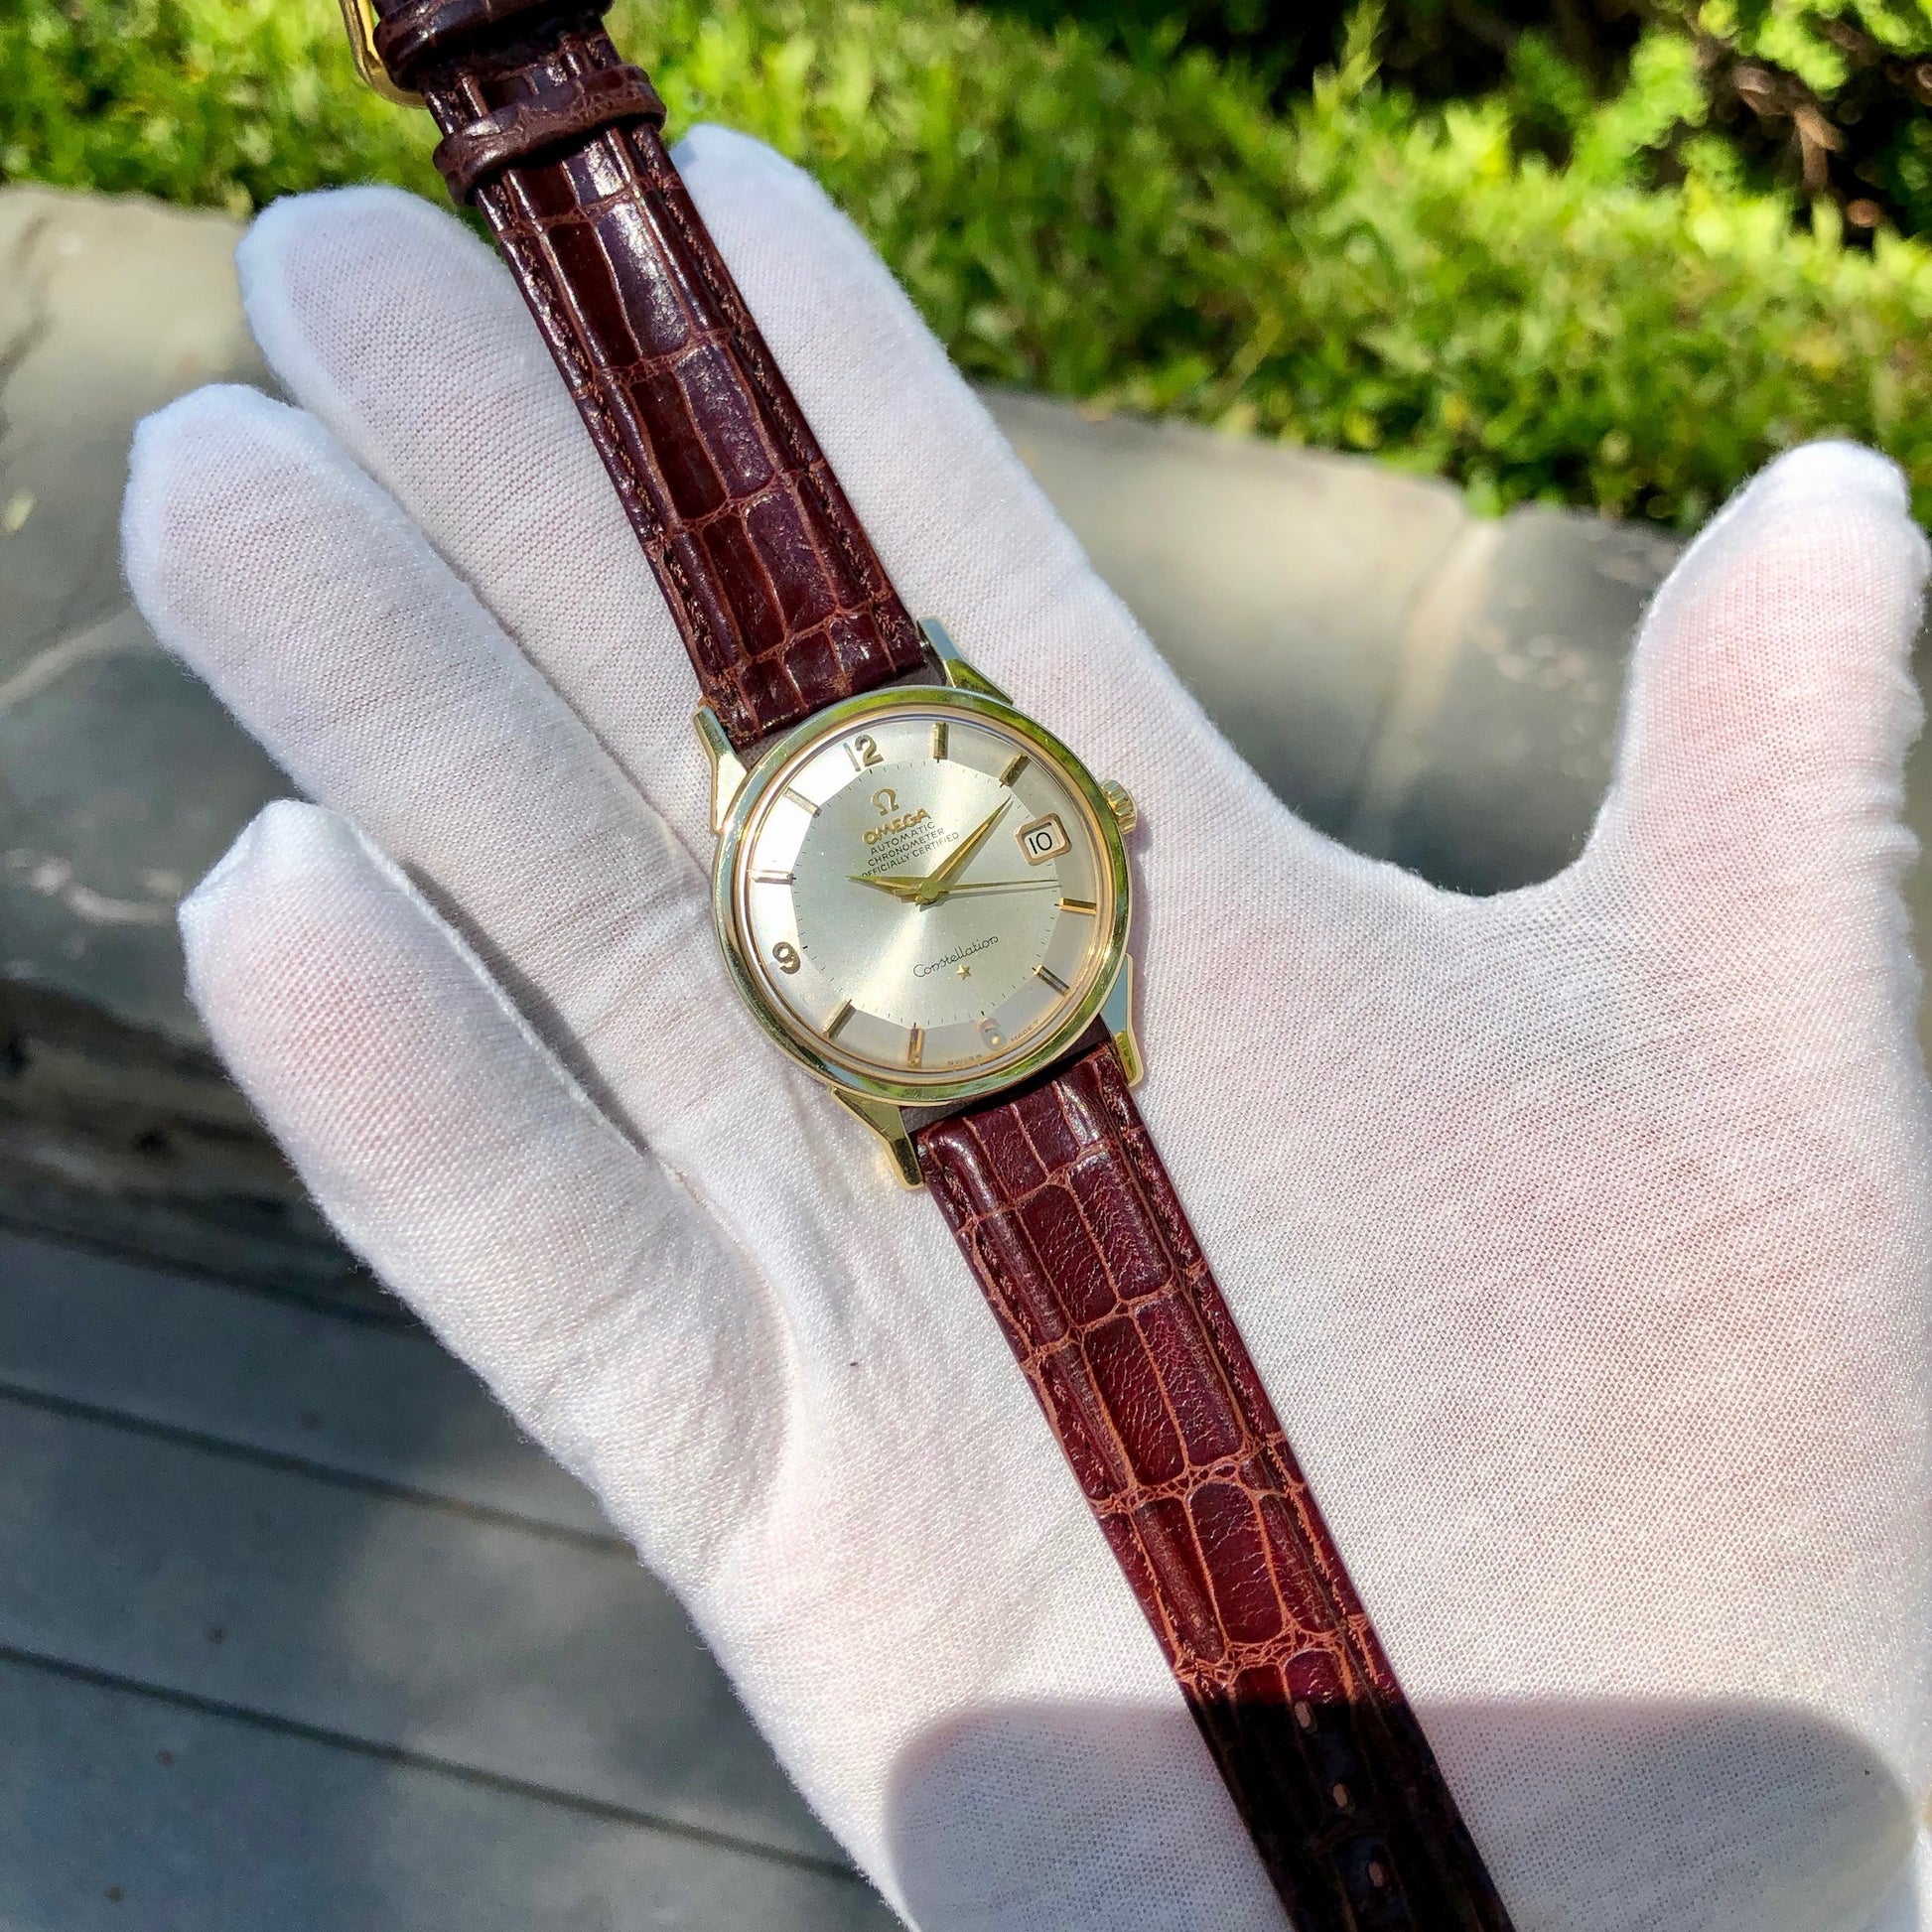 Vintage Omega Constellation 168.005 Chronometer Cal. 561 Automatic Gold Top Steel Wristwatch Circa 1966 - Hashtag Watch Company